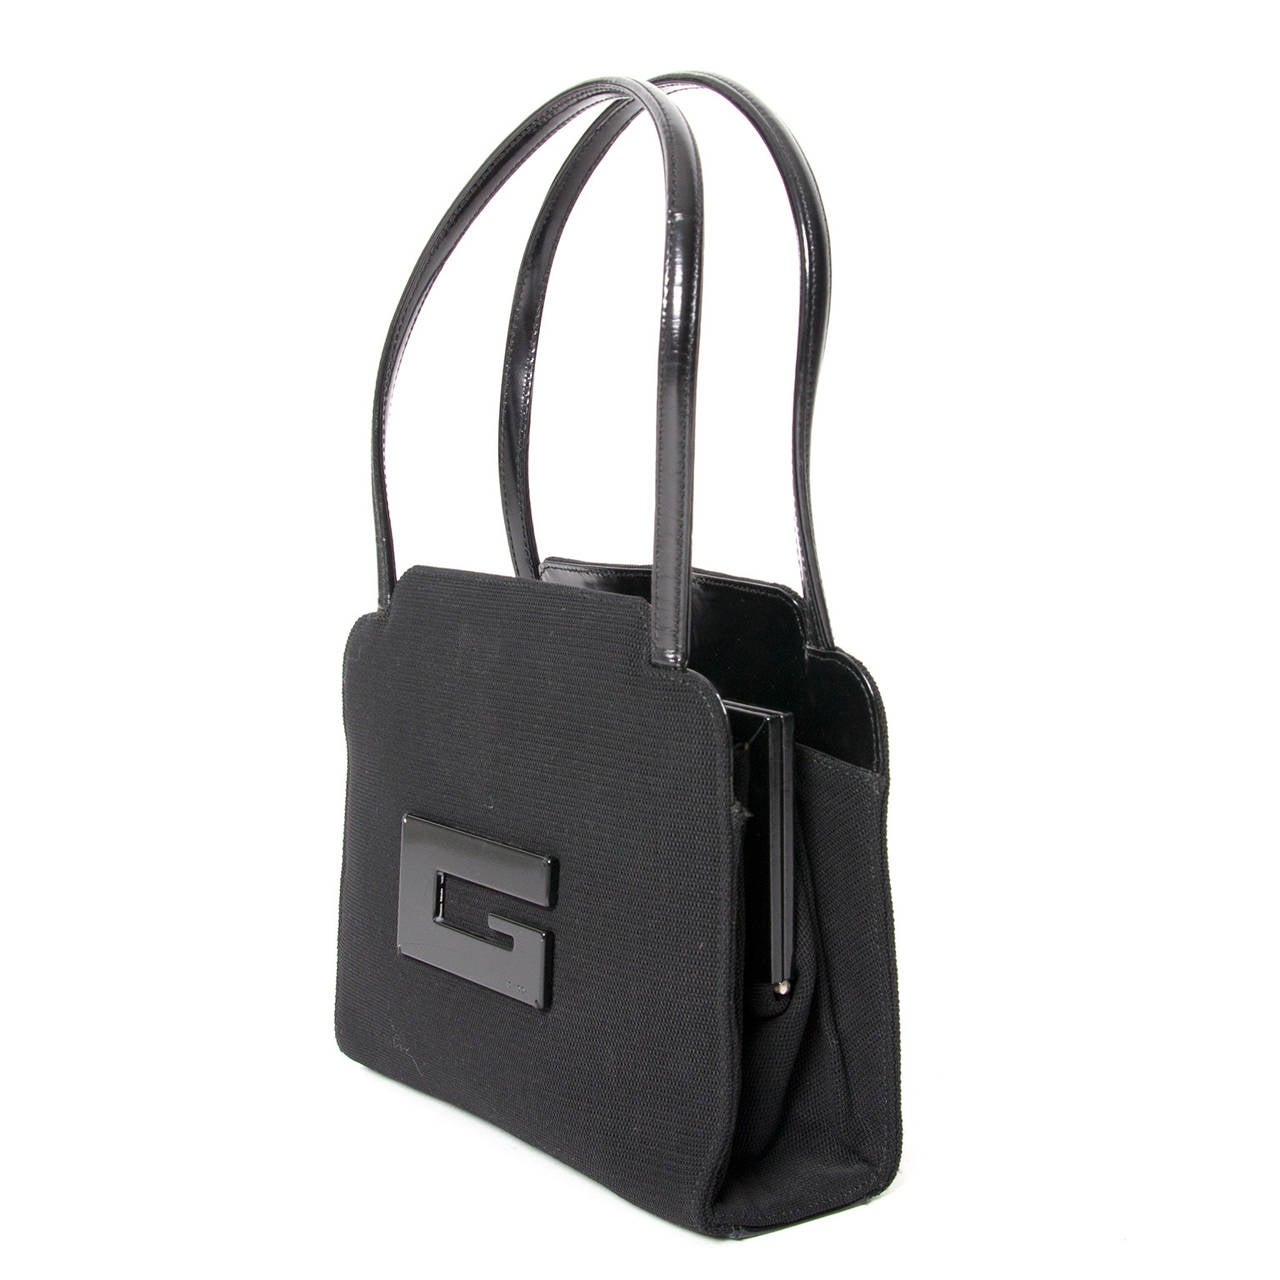 Gucci Black Vintage Canvas Handbag

This vintage black Gucci handbag is perfect to carry your essentials for a night out! 

The bag is made of black canvas and has leather handels. It has three compartmens, the middle compartment can be closed